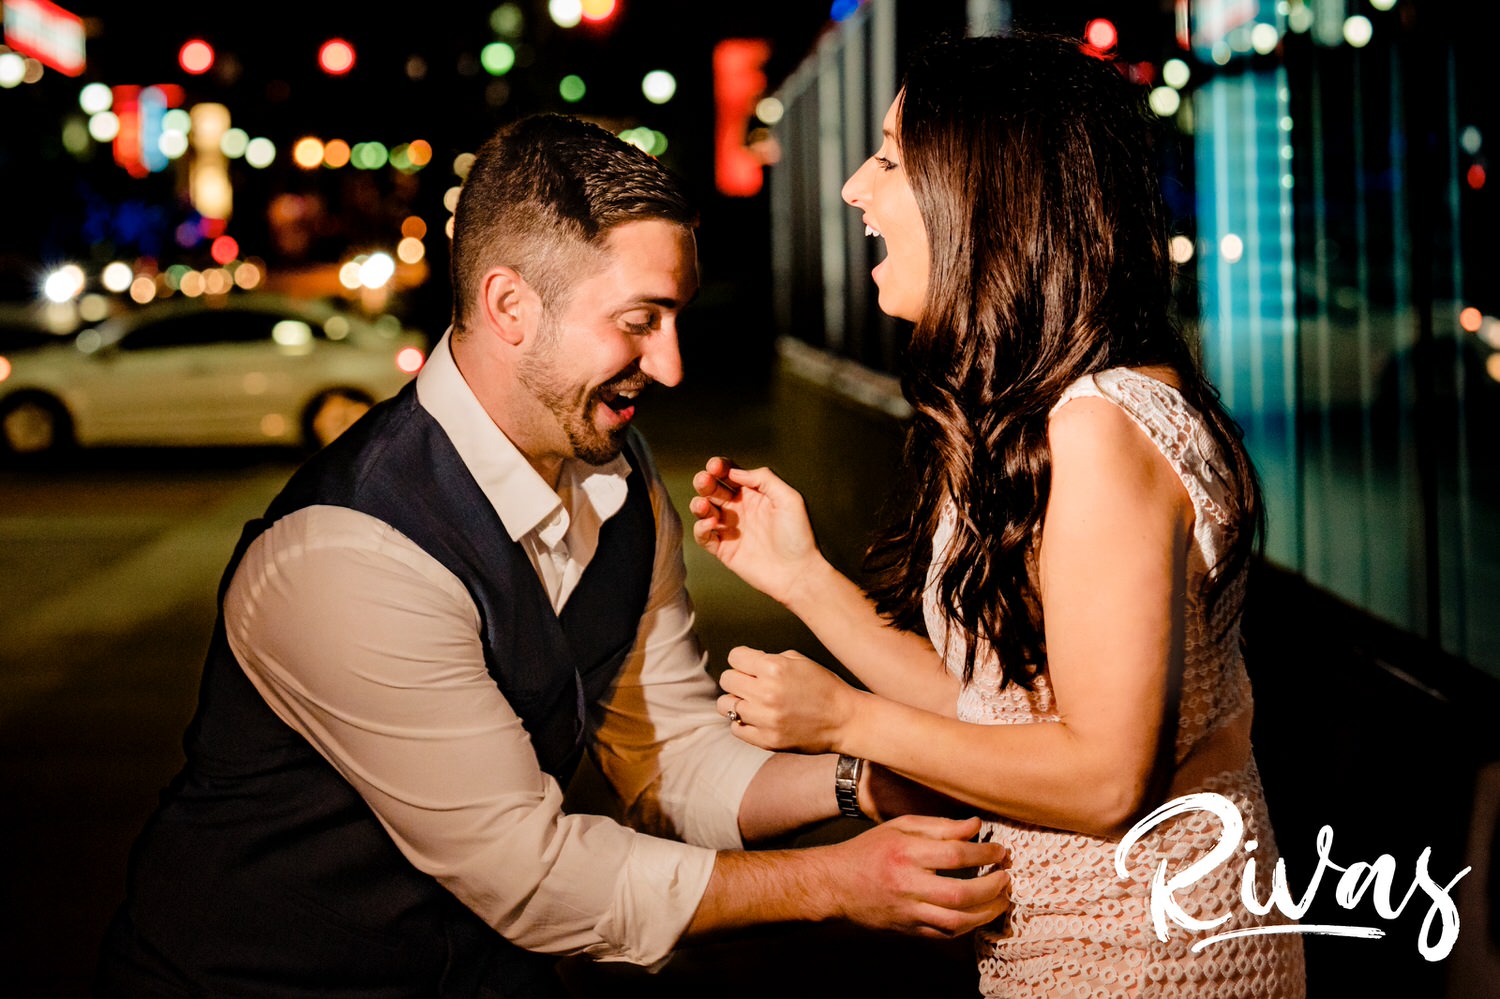 A colorful, candid picture taken after dark of a man tickling a woman as she laughs hysterically during their summer engagement session in downtown Kansas City.